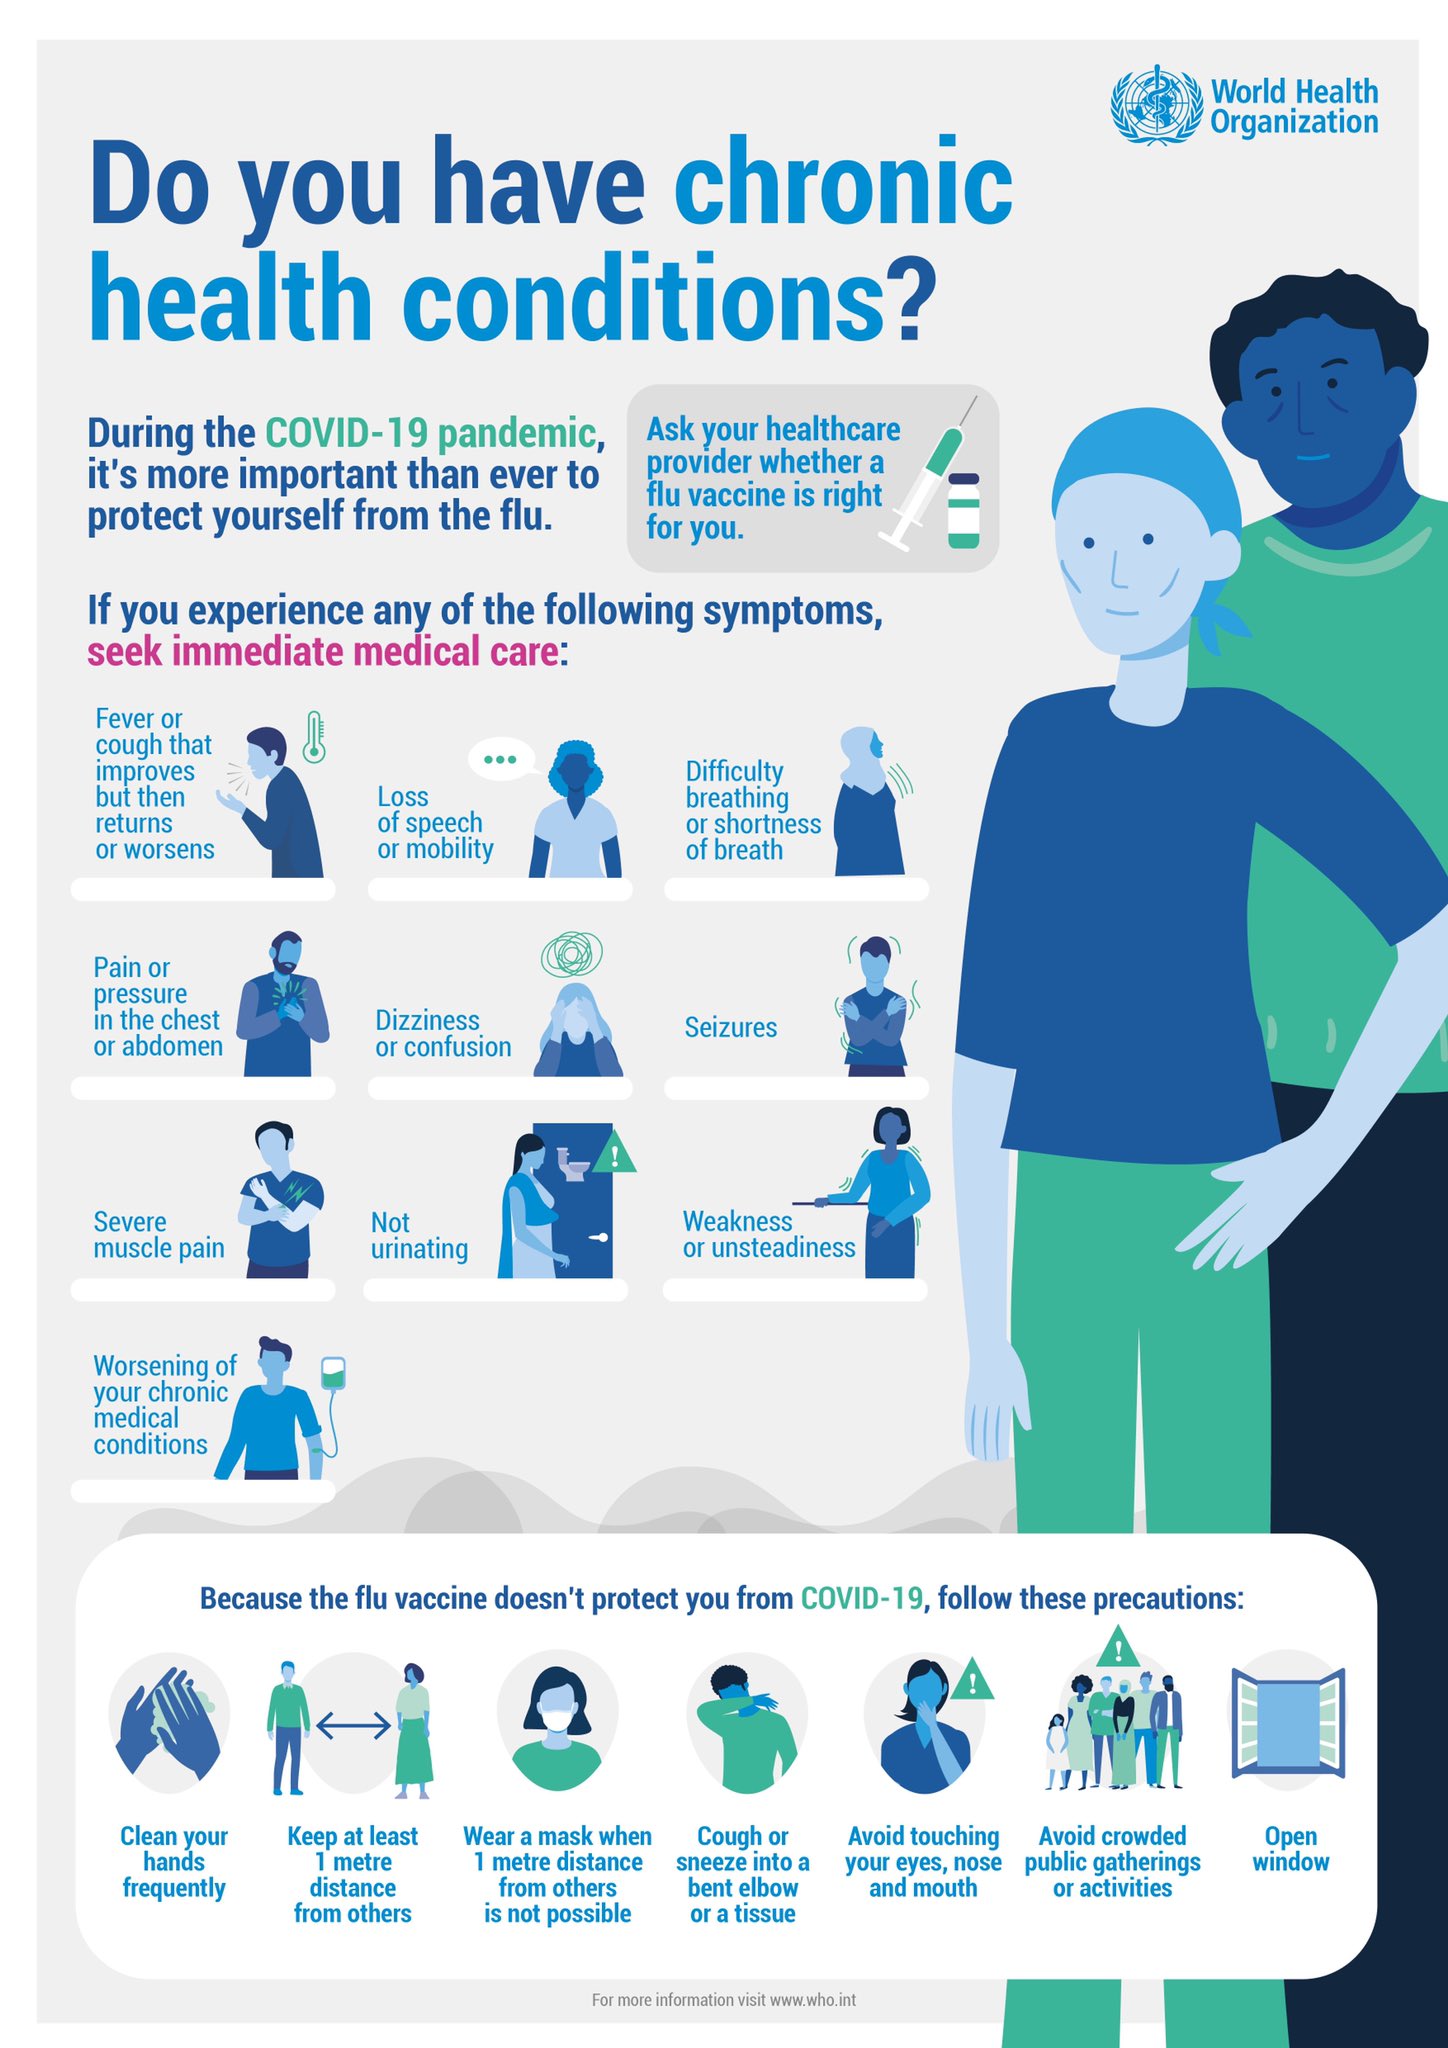 Do you have chronic health conditions?, WHO, iiQ8 Health